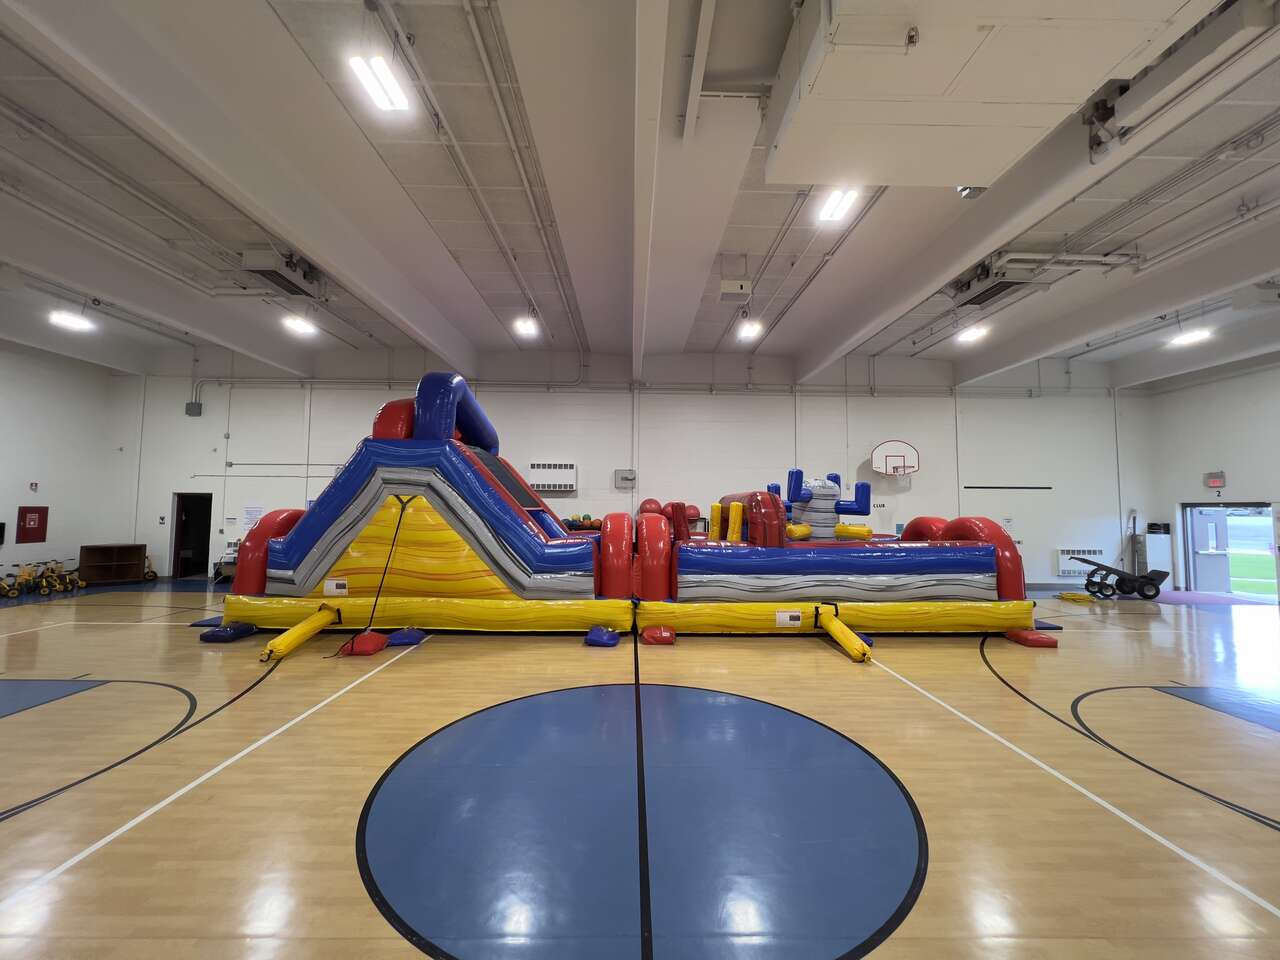 obstacles courses, from Fun Bounces Rental in Seneca, IL 61360